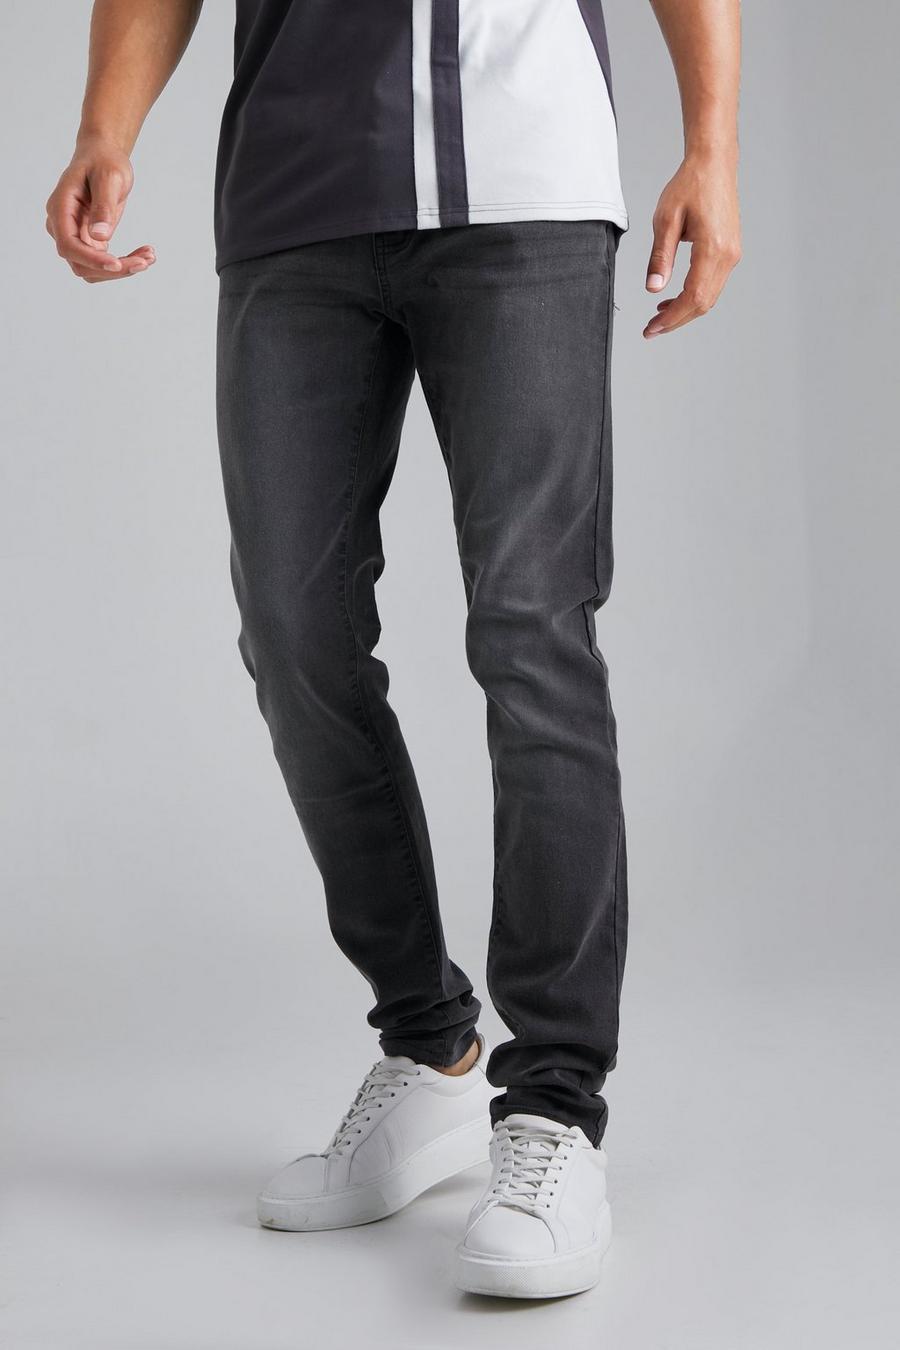 Charcoal grey Tall Stretch Skinny Fit Jeans